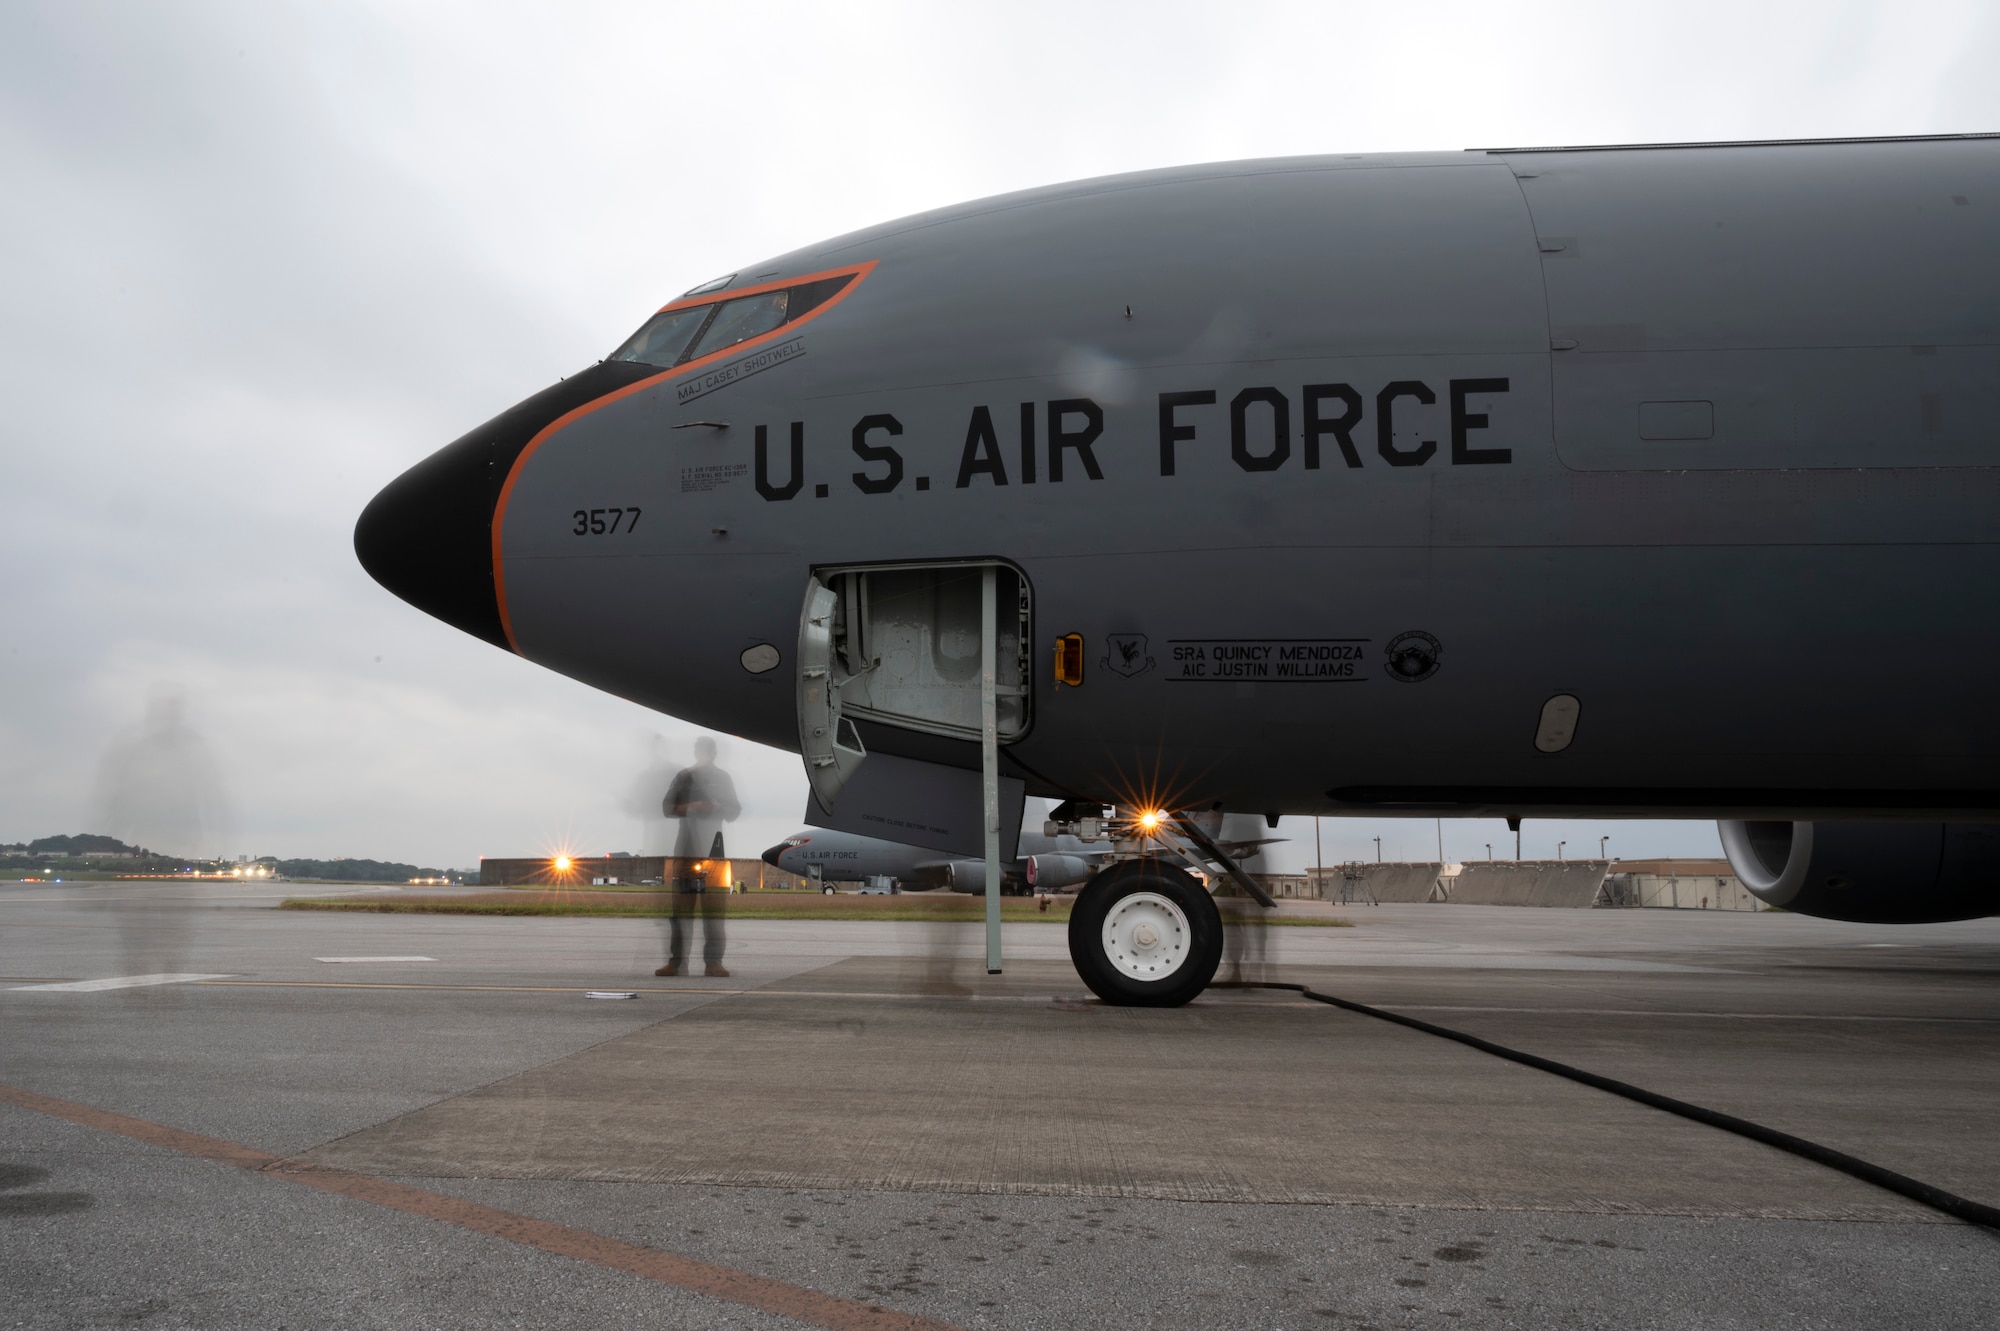 A U.S. Air Force KC-135 Stratotanker assigned to the 909th Air Refueling Squadron sits on the flightline prior to a refueling flight at Kadena Air Base, Japan, Nov. 4, 2022. The KC-135 Stratotanker provides the core aerial refueling capability for the Department of Defense, supporting the U.S. Navy, U.S. Marine Corps, and Allied nation aircraft. (U.S. Air Force photo by Senior Airman Jessi Roth)